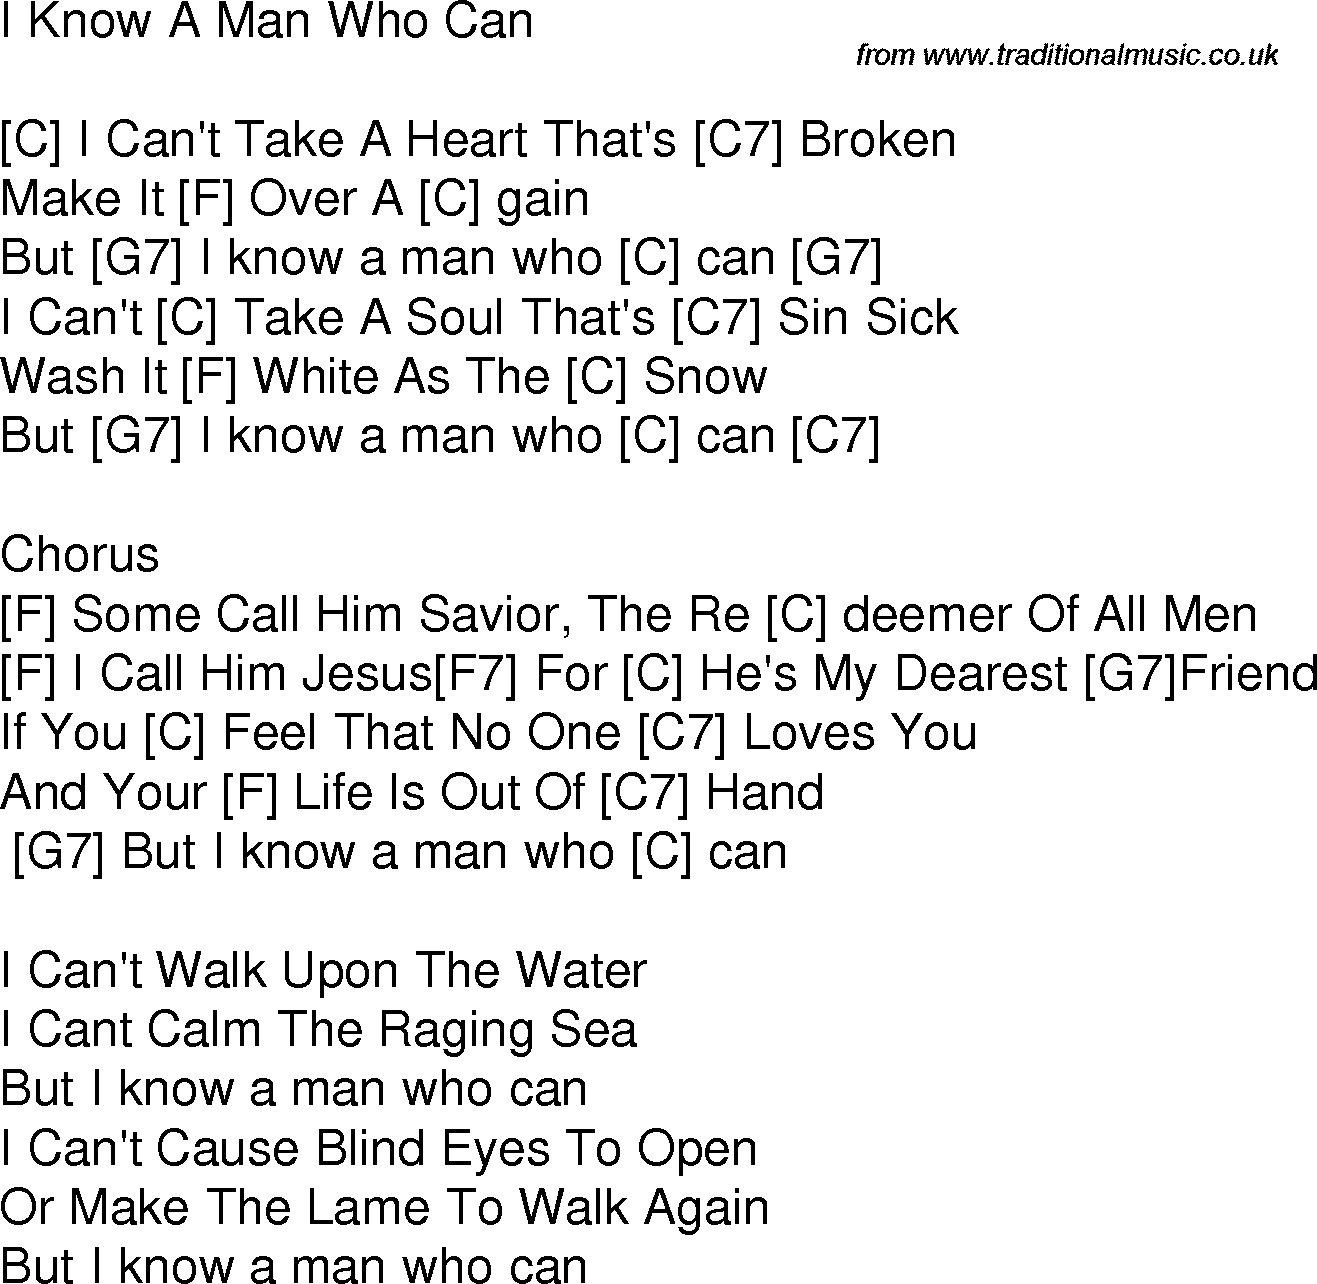 Old time song lyrics with chords for I Know A Man Who Can C